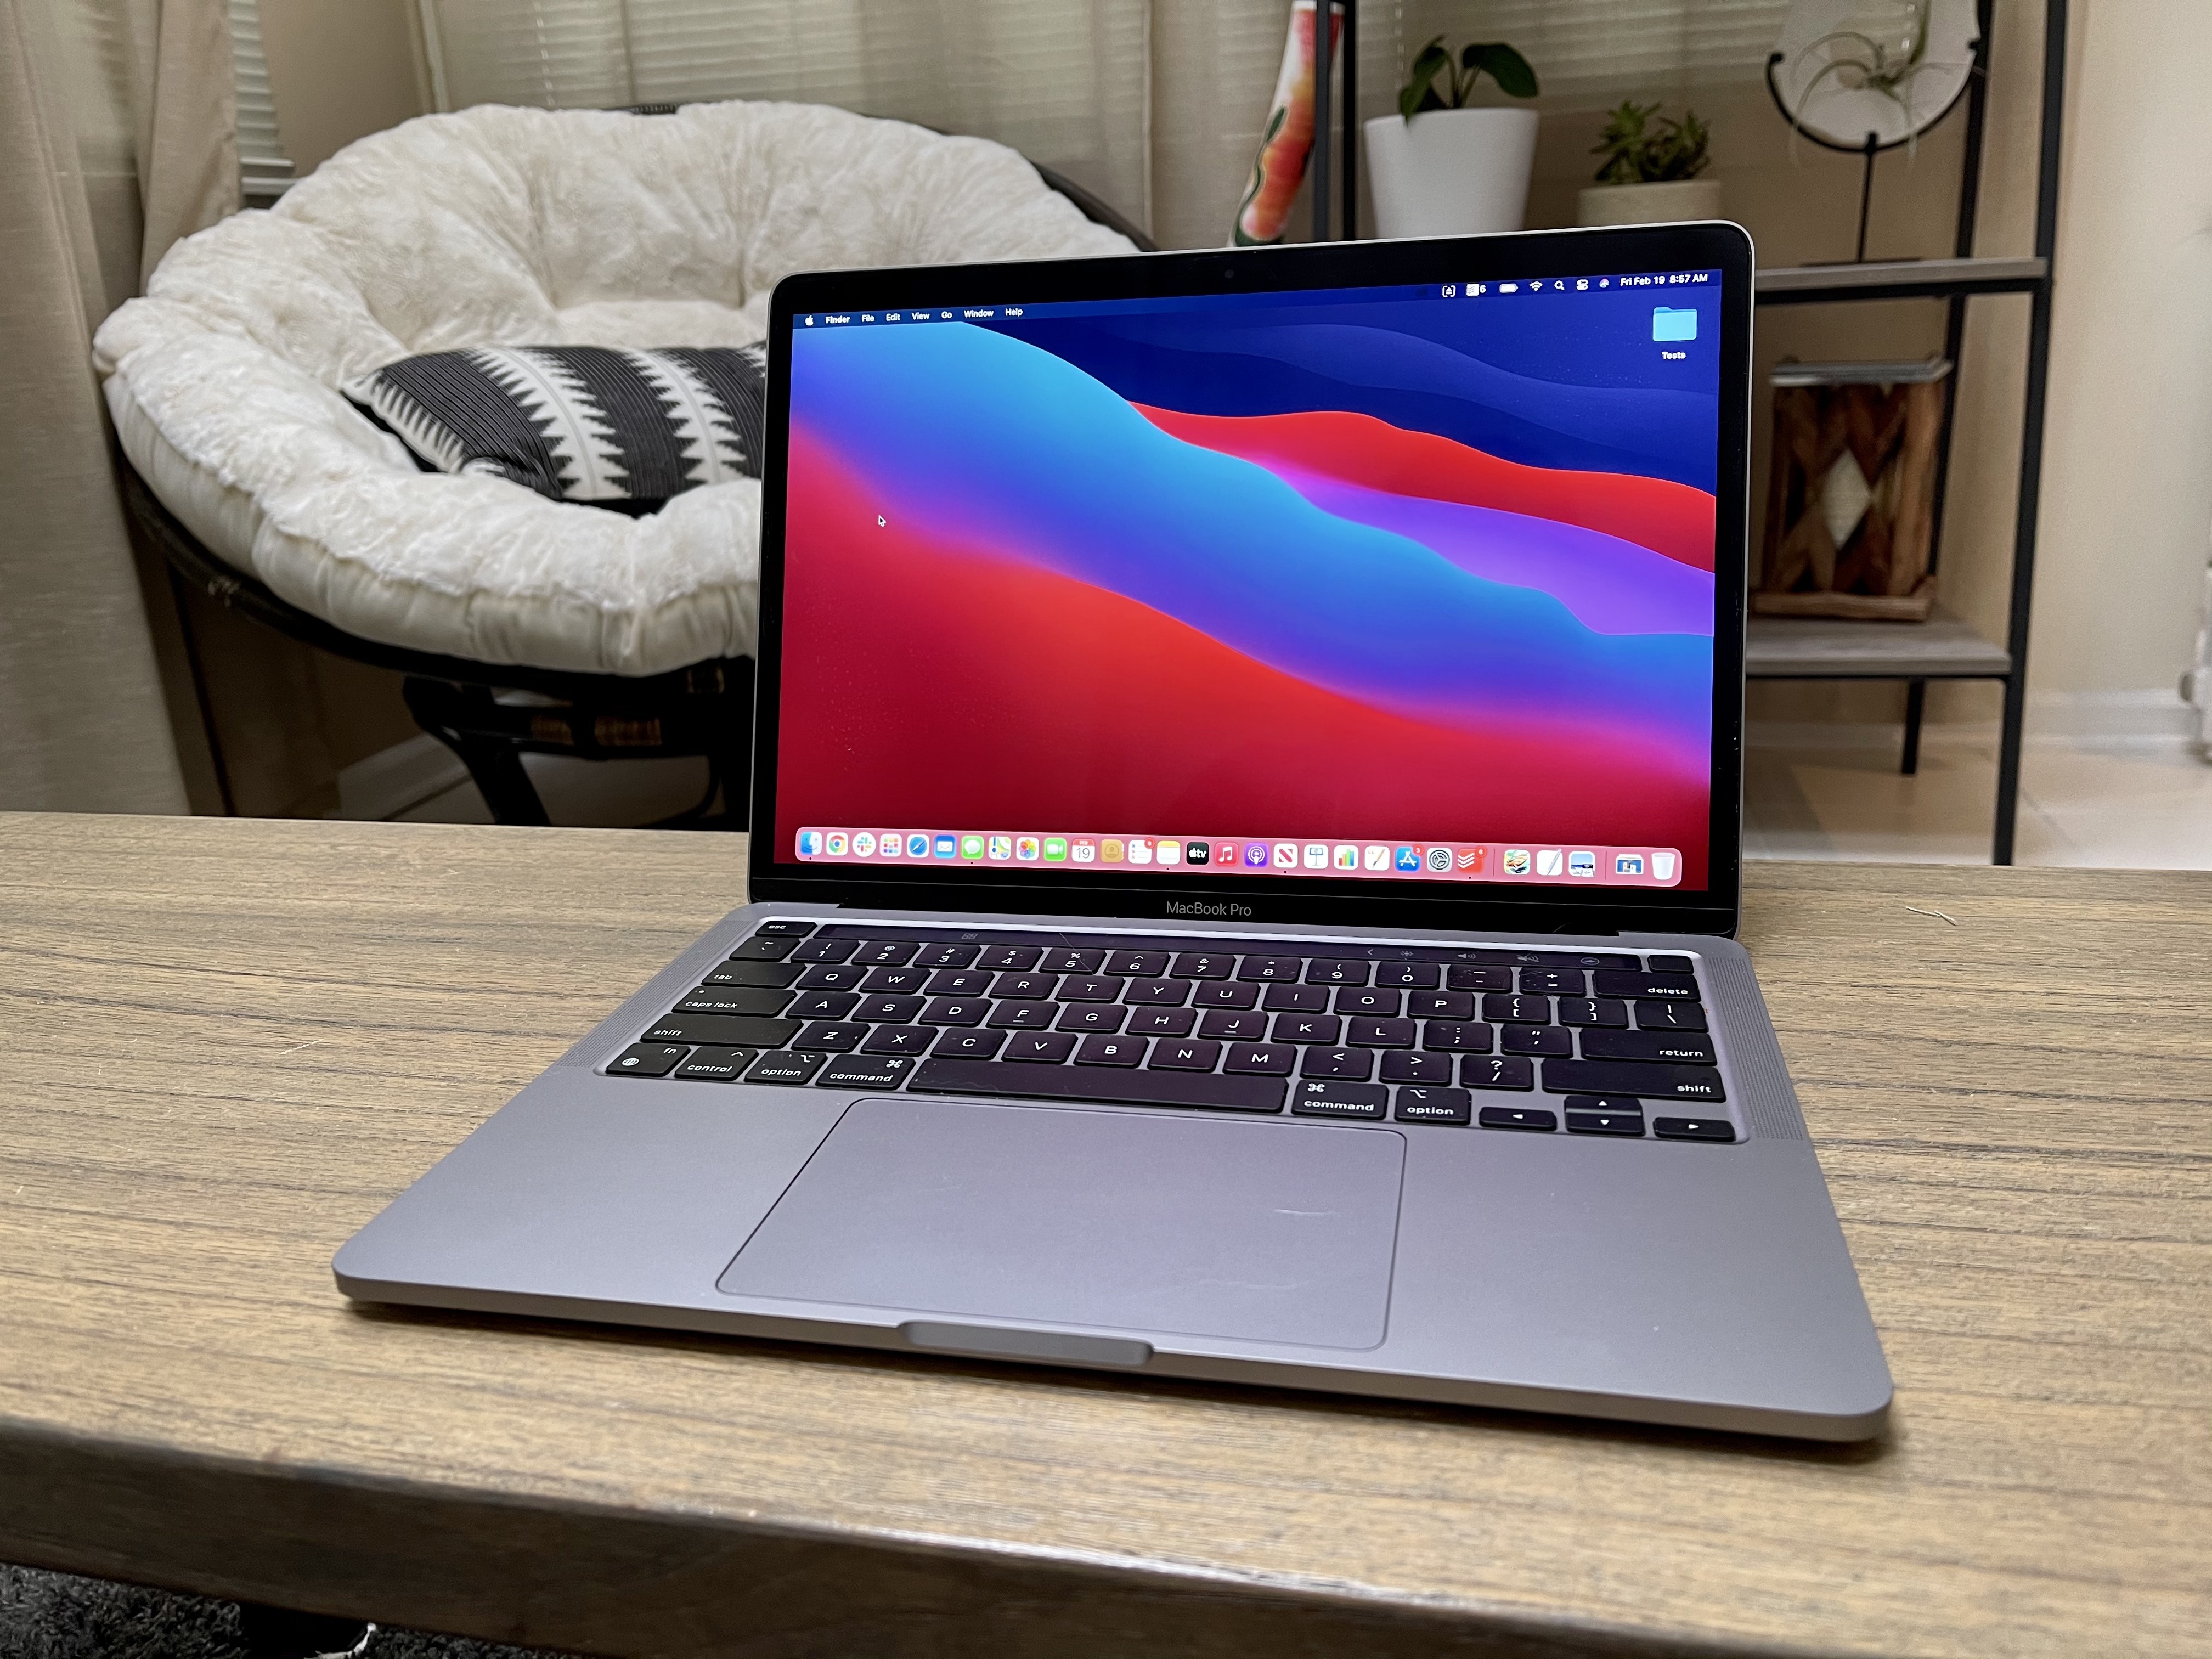 Rumors suggest the 2022 MacBook Pro will be an entry-level model, and priced accordingly — expect a starting price between $1,299 - $1,499.